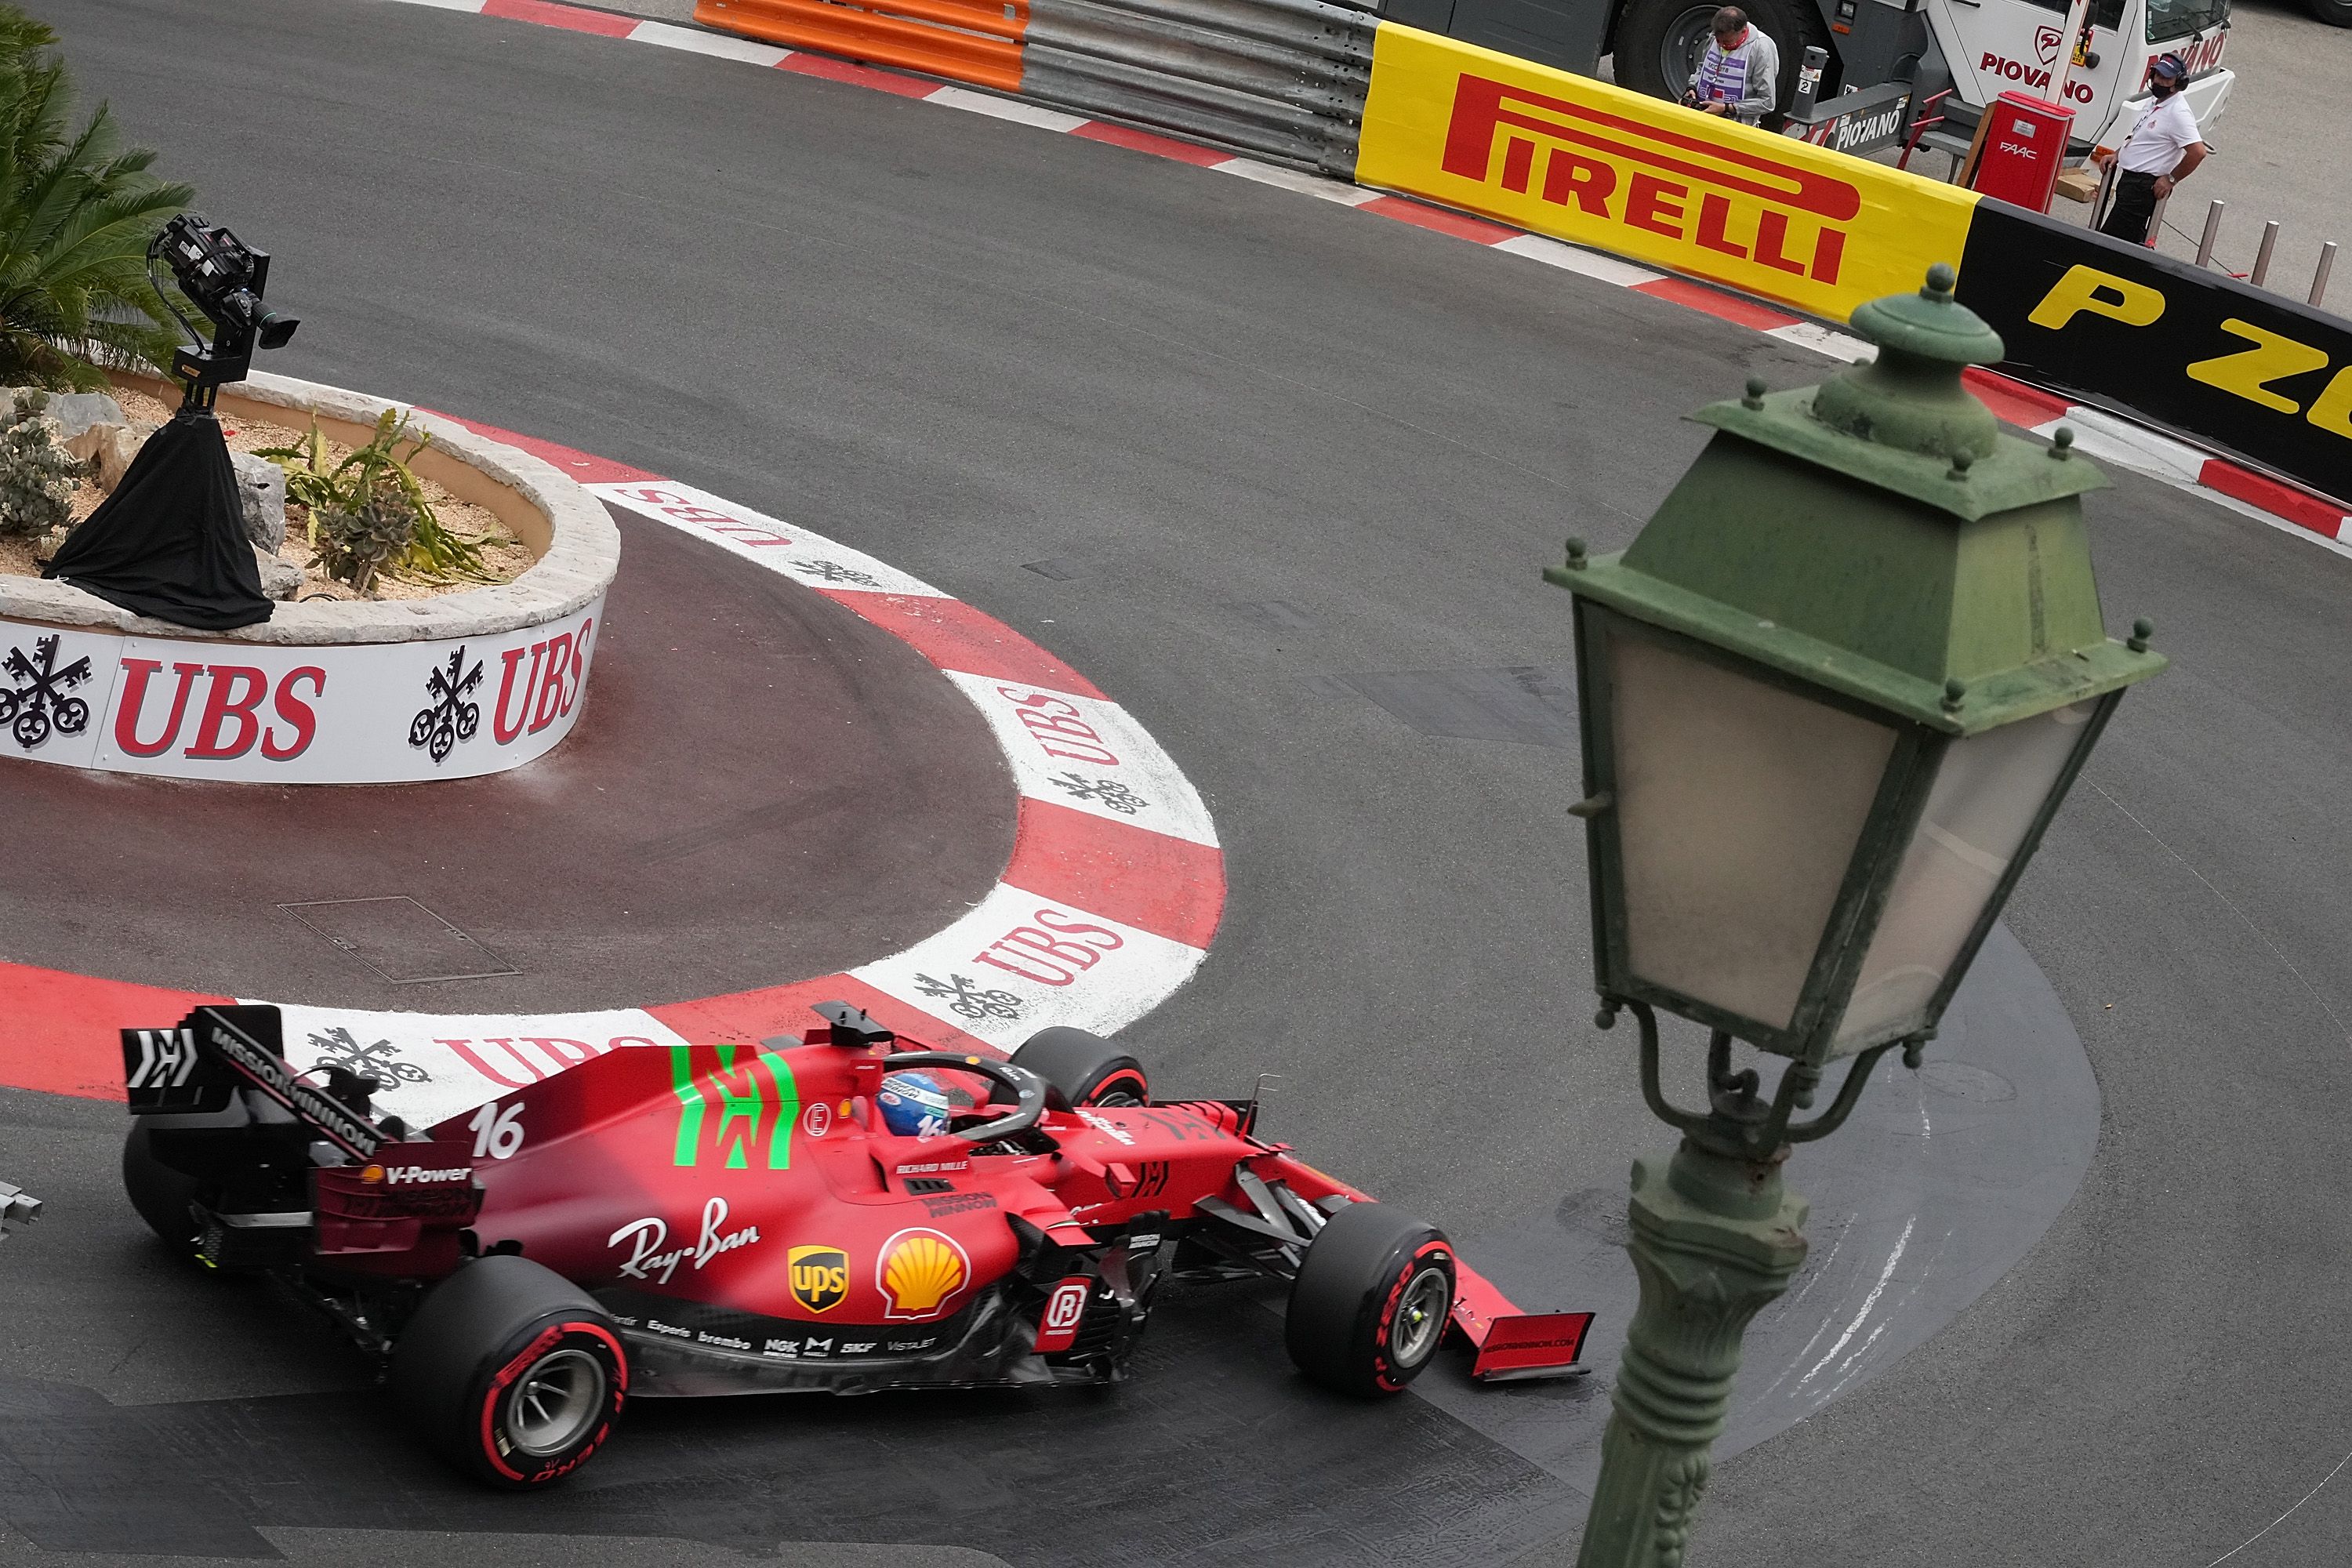 Ferrari Once Again Pulls Mission Winnows Totally-Not-Tobacco Logos Off its F1 Cars